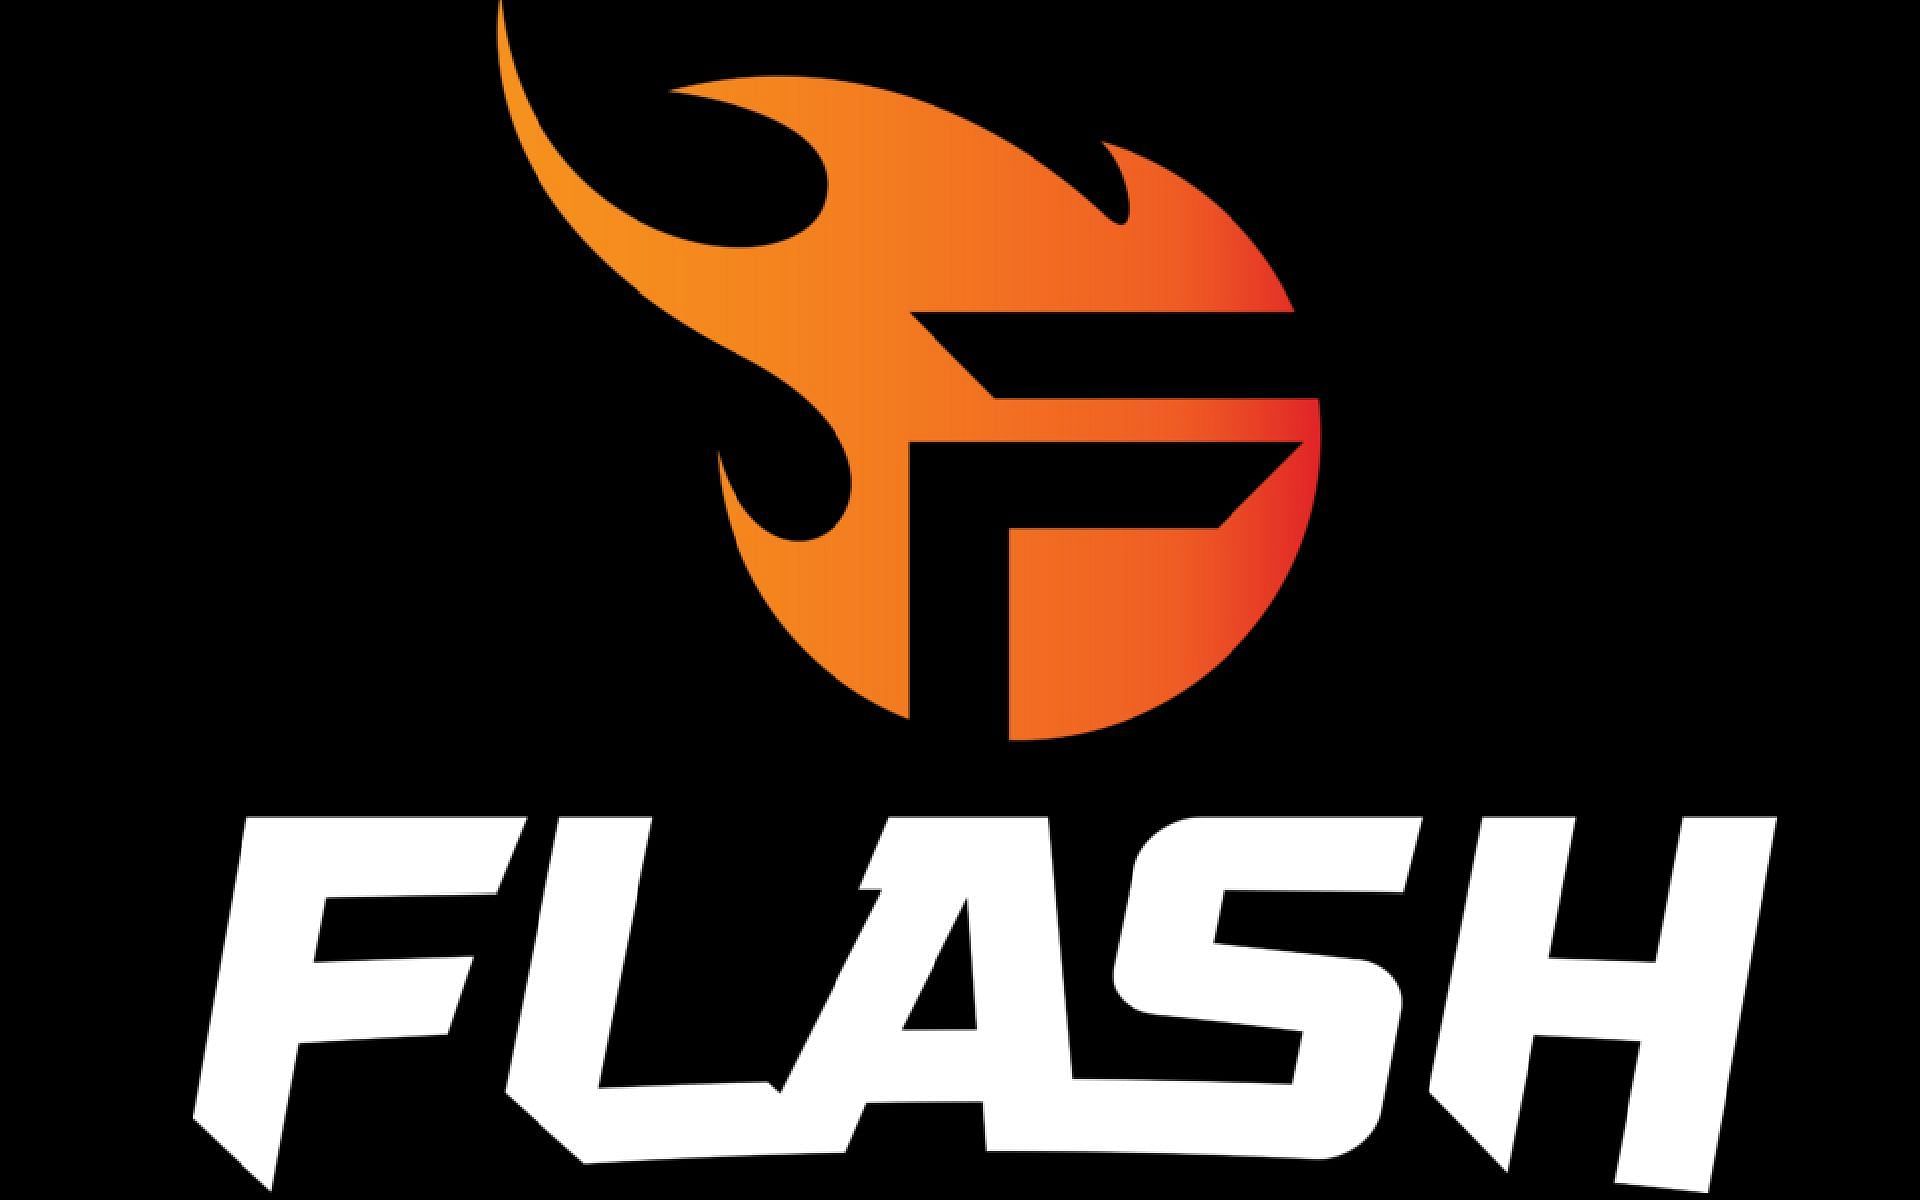 Team Flash is one of the best teams in the tournament (Image via Team Flash)